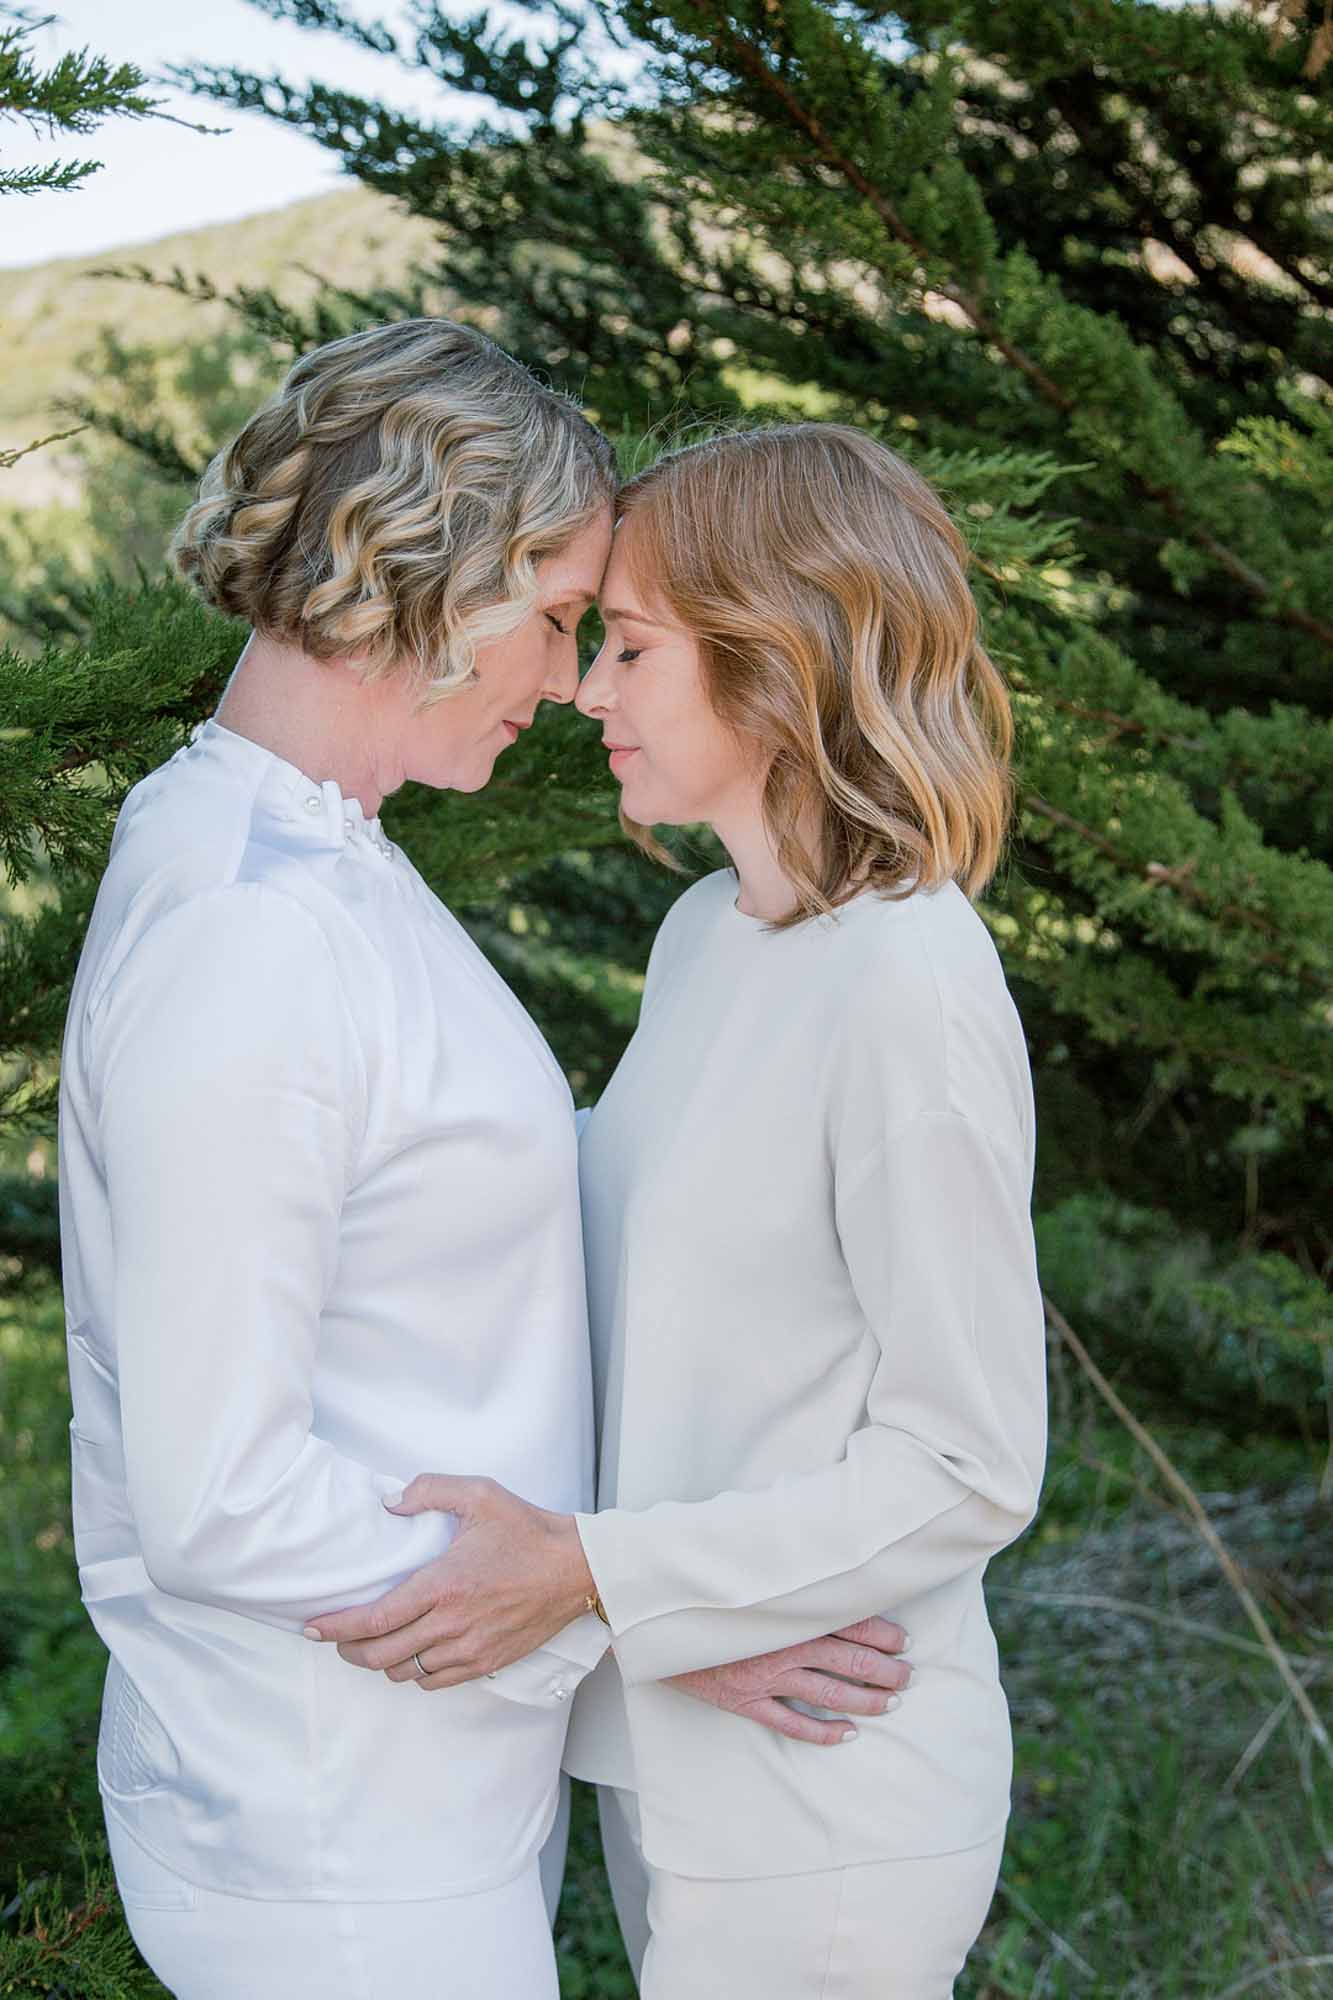 California beach photo session to celebrate virtual wedding | Renoda Campbell Photography | Featured on Equally Wed, the leading LGBTQ+ wedding magazine